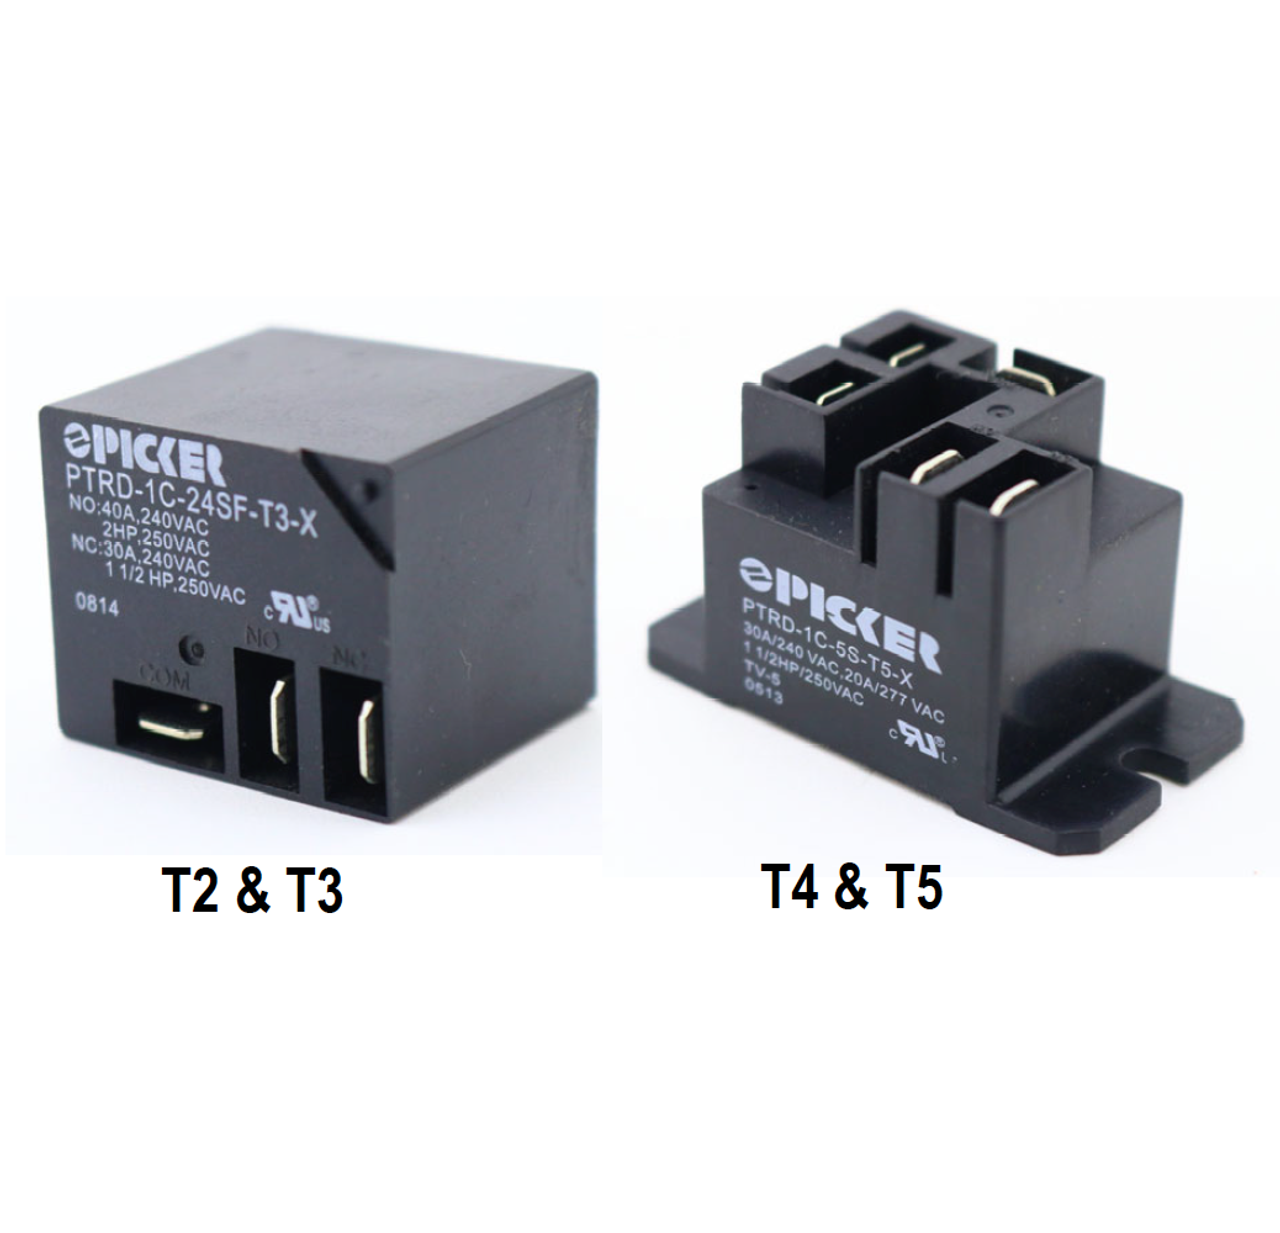 Picker PTRD-1A-24CT-T2-X Power Relays